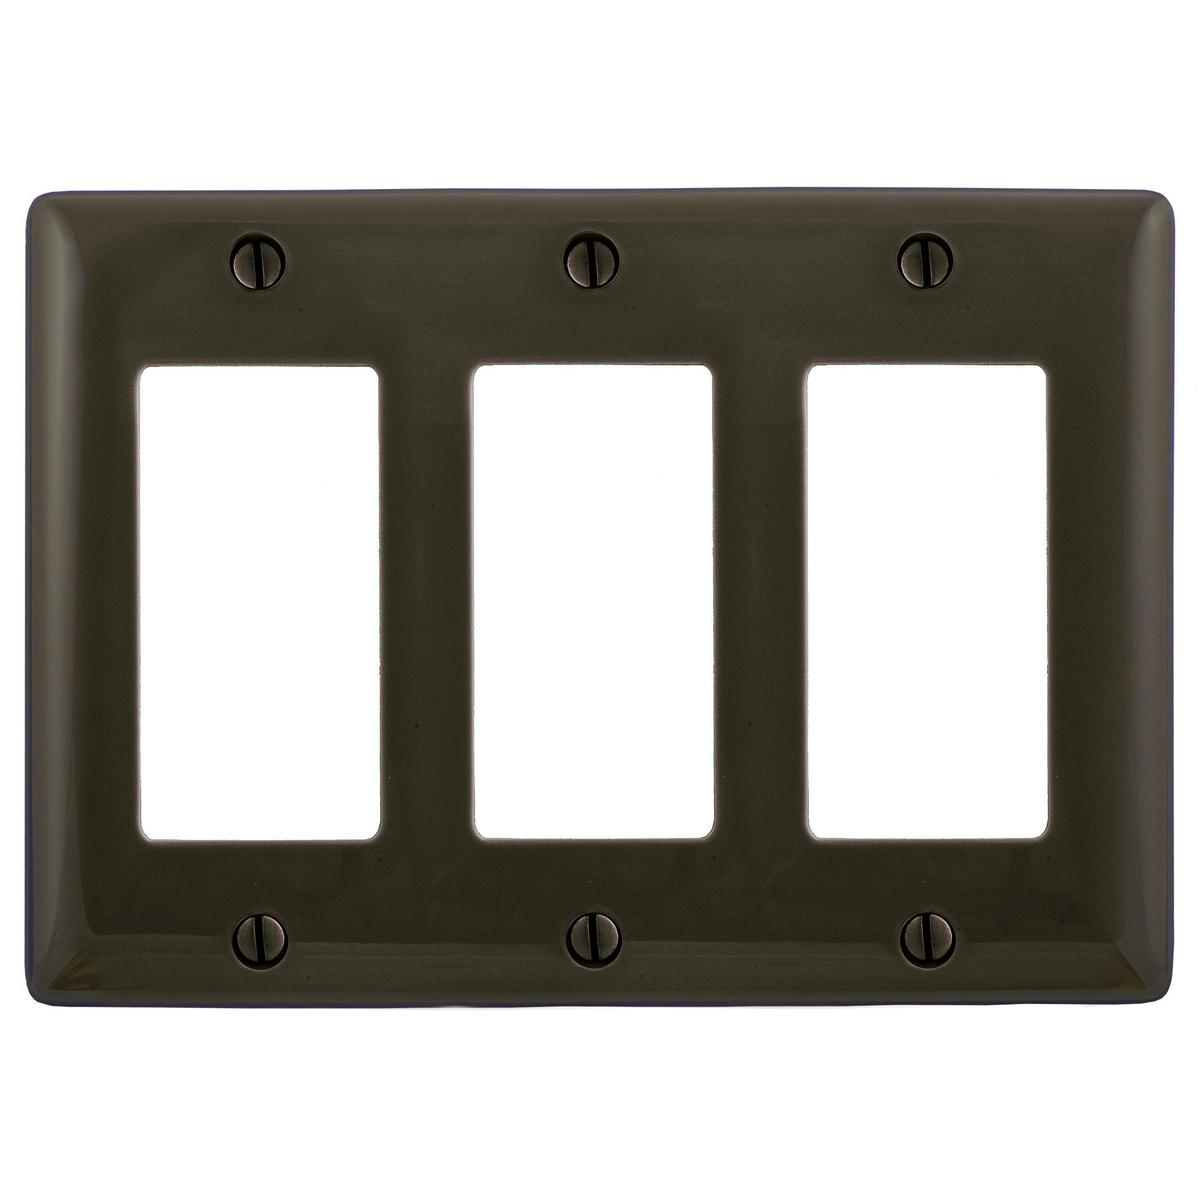 Hubbell NP263 Wallplates and Box Covers, Wallplate, Nylon, 3-Gang, 3) Decorator, Brown  ; Reinforcement ribs for extra strength ; Captive screw feature holds mounting screw in place ; High-impact, self-extinguishing nylon material ; Standard Size is 1/8" larger to give